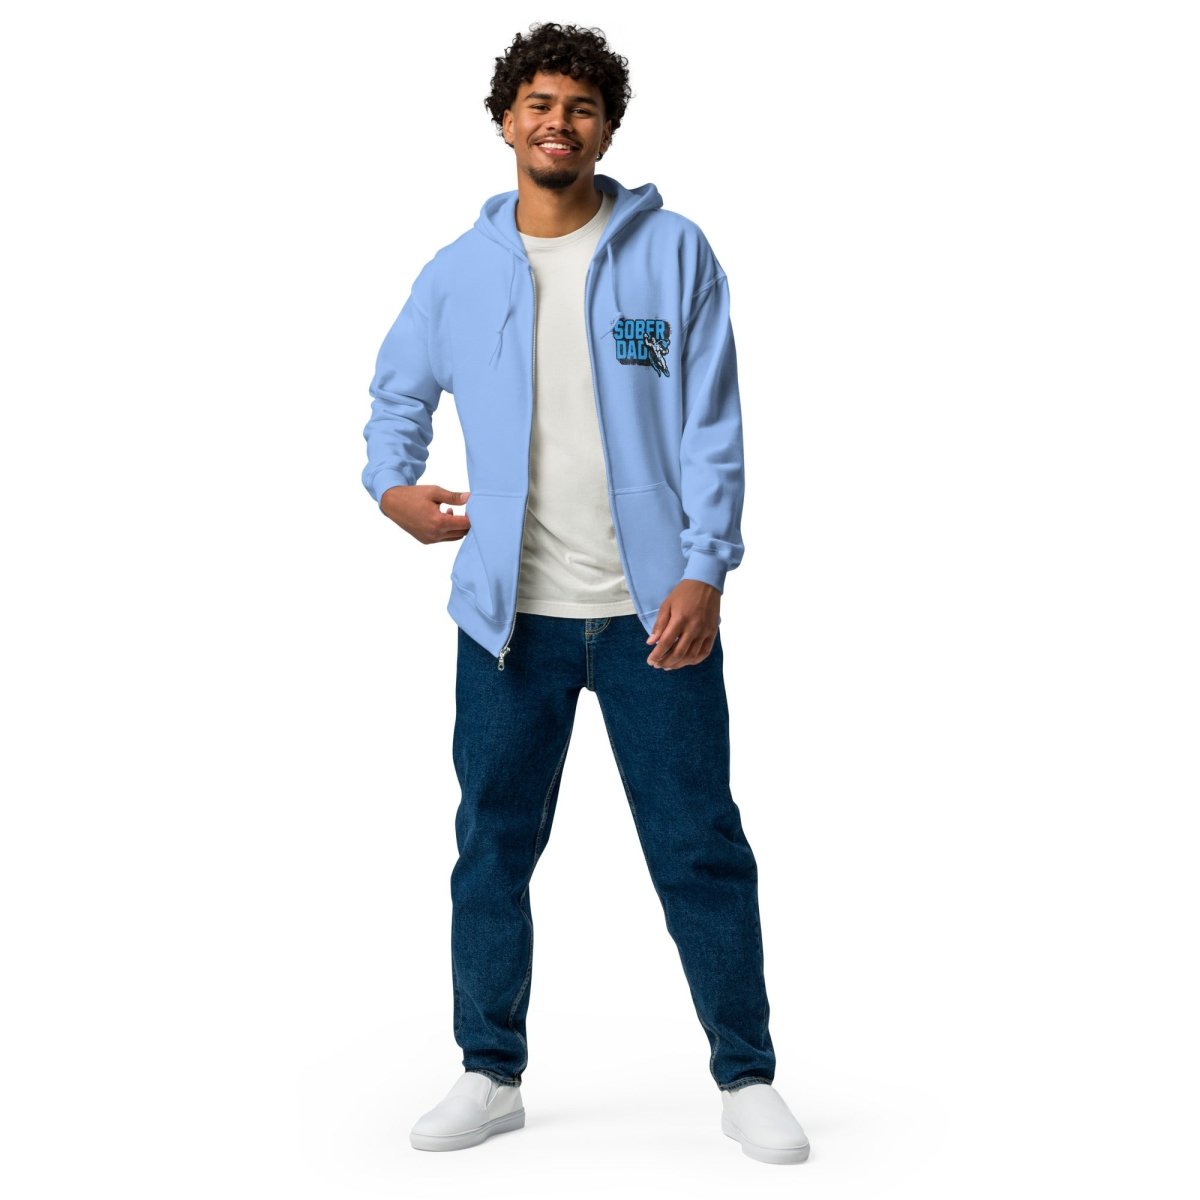 Soberdad Zip Up Hoodie: Embrace Sobriety with Fatherhood Flair - Sobervation